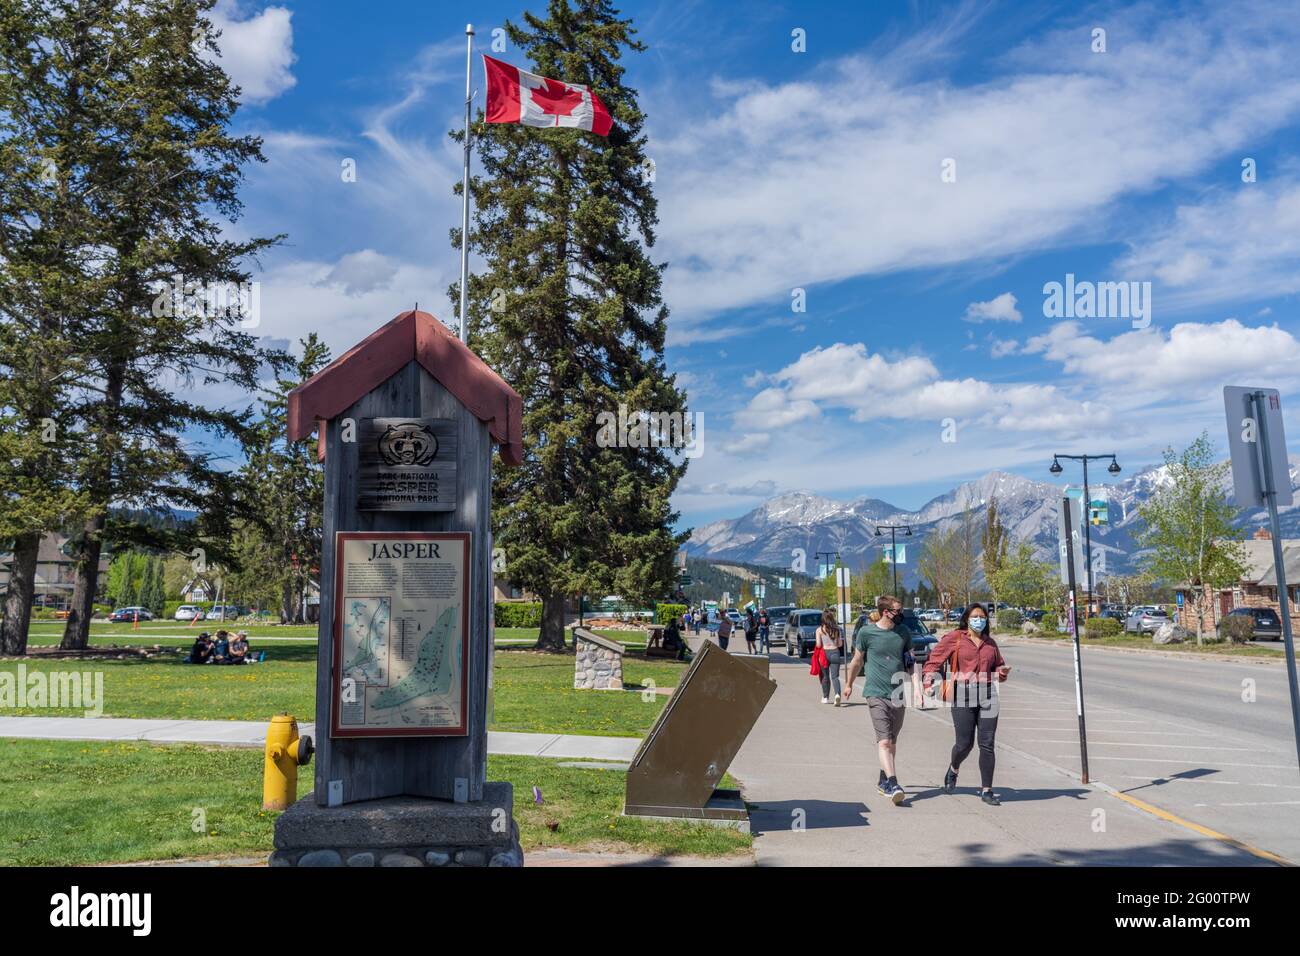 Street view of Town Jasper in summer time season during covid-20 pandemic period, people are wearing face masks. Jasper, Alberta, Canada. Stock Photo